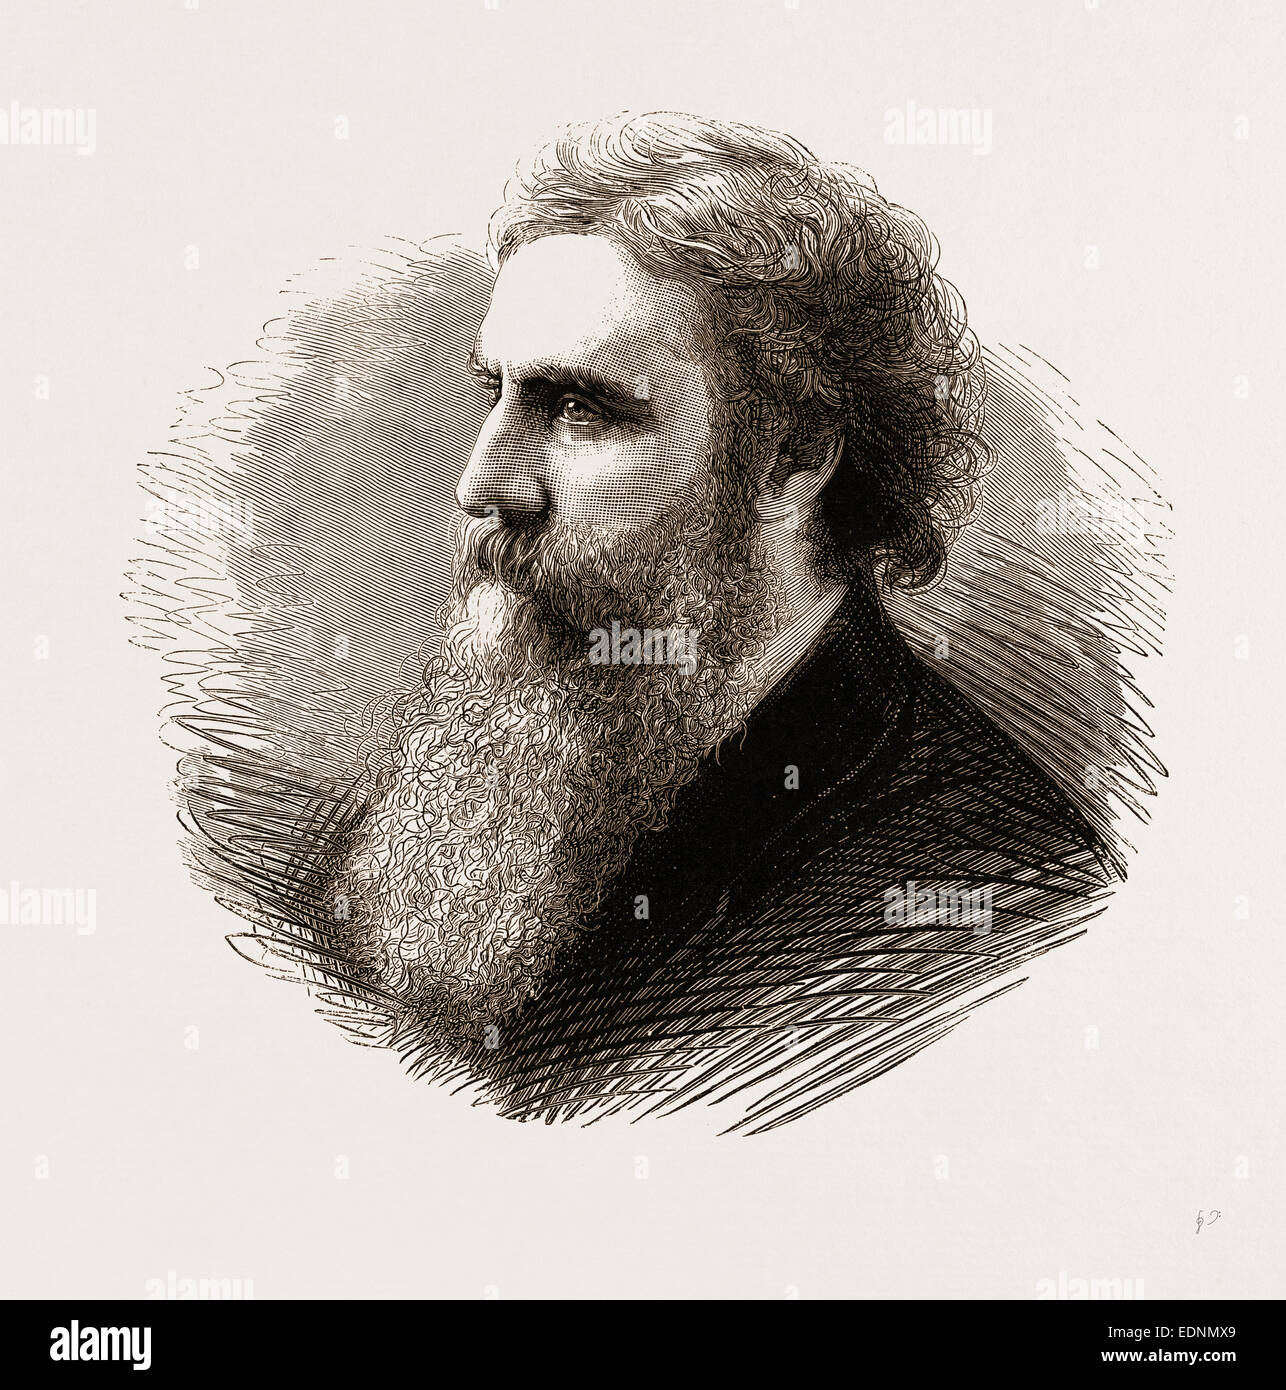 GEORGE MACDONALD, AUTHOR OF 'ST. GEORGE AND ST. MICHAEL,' AND 'DAVID ELGINBROD', 1875 Stock Photo